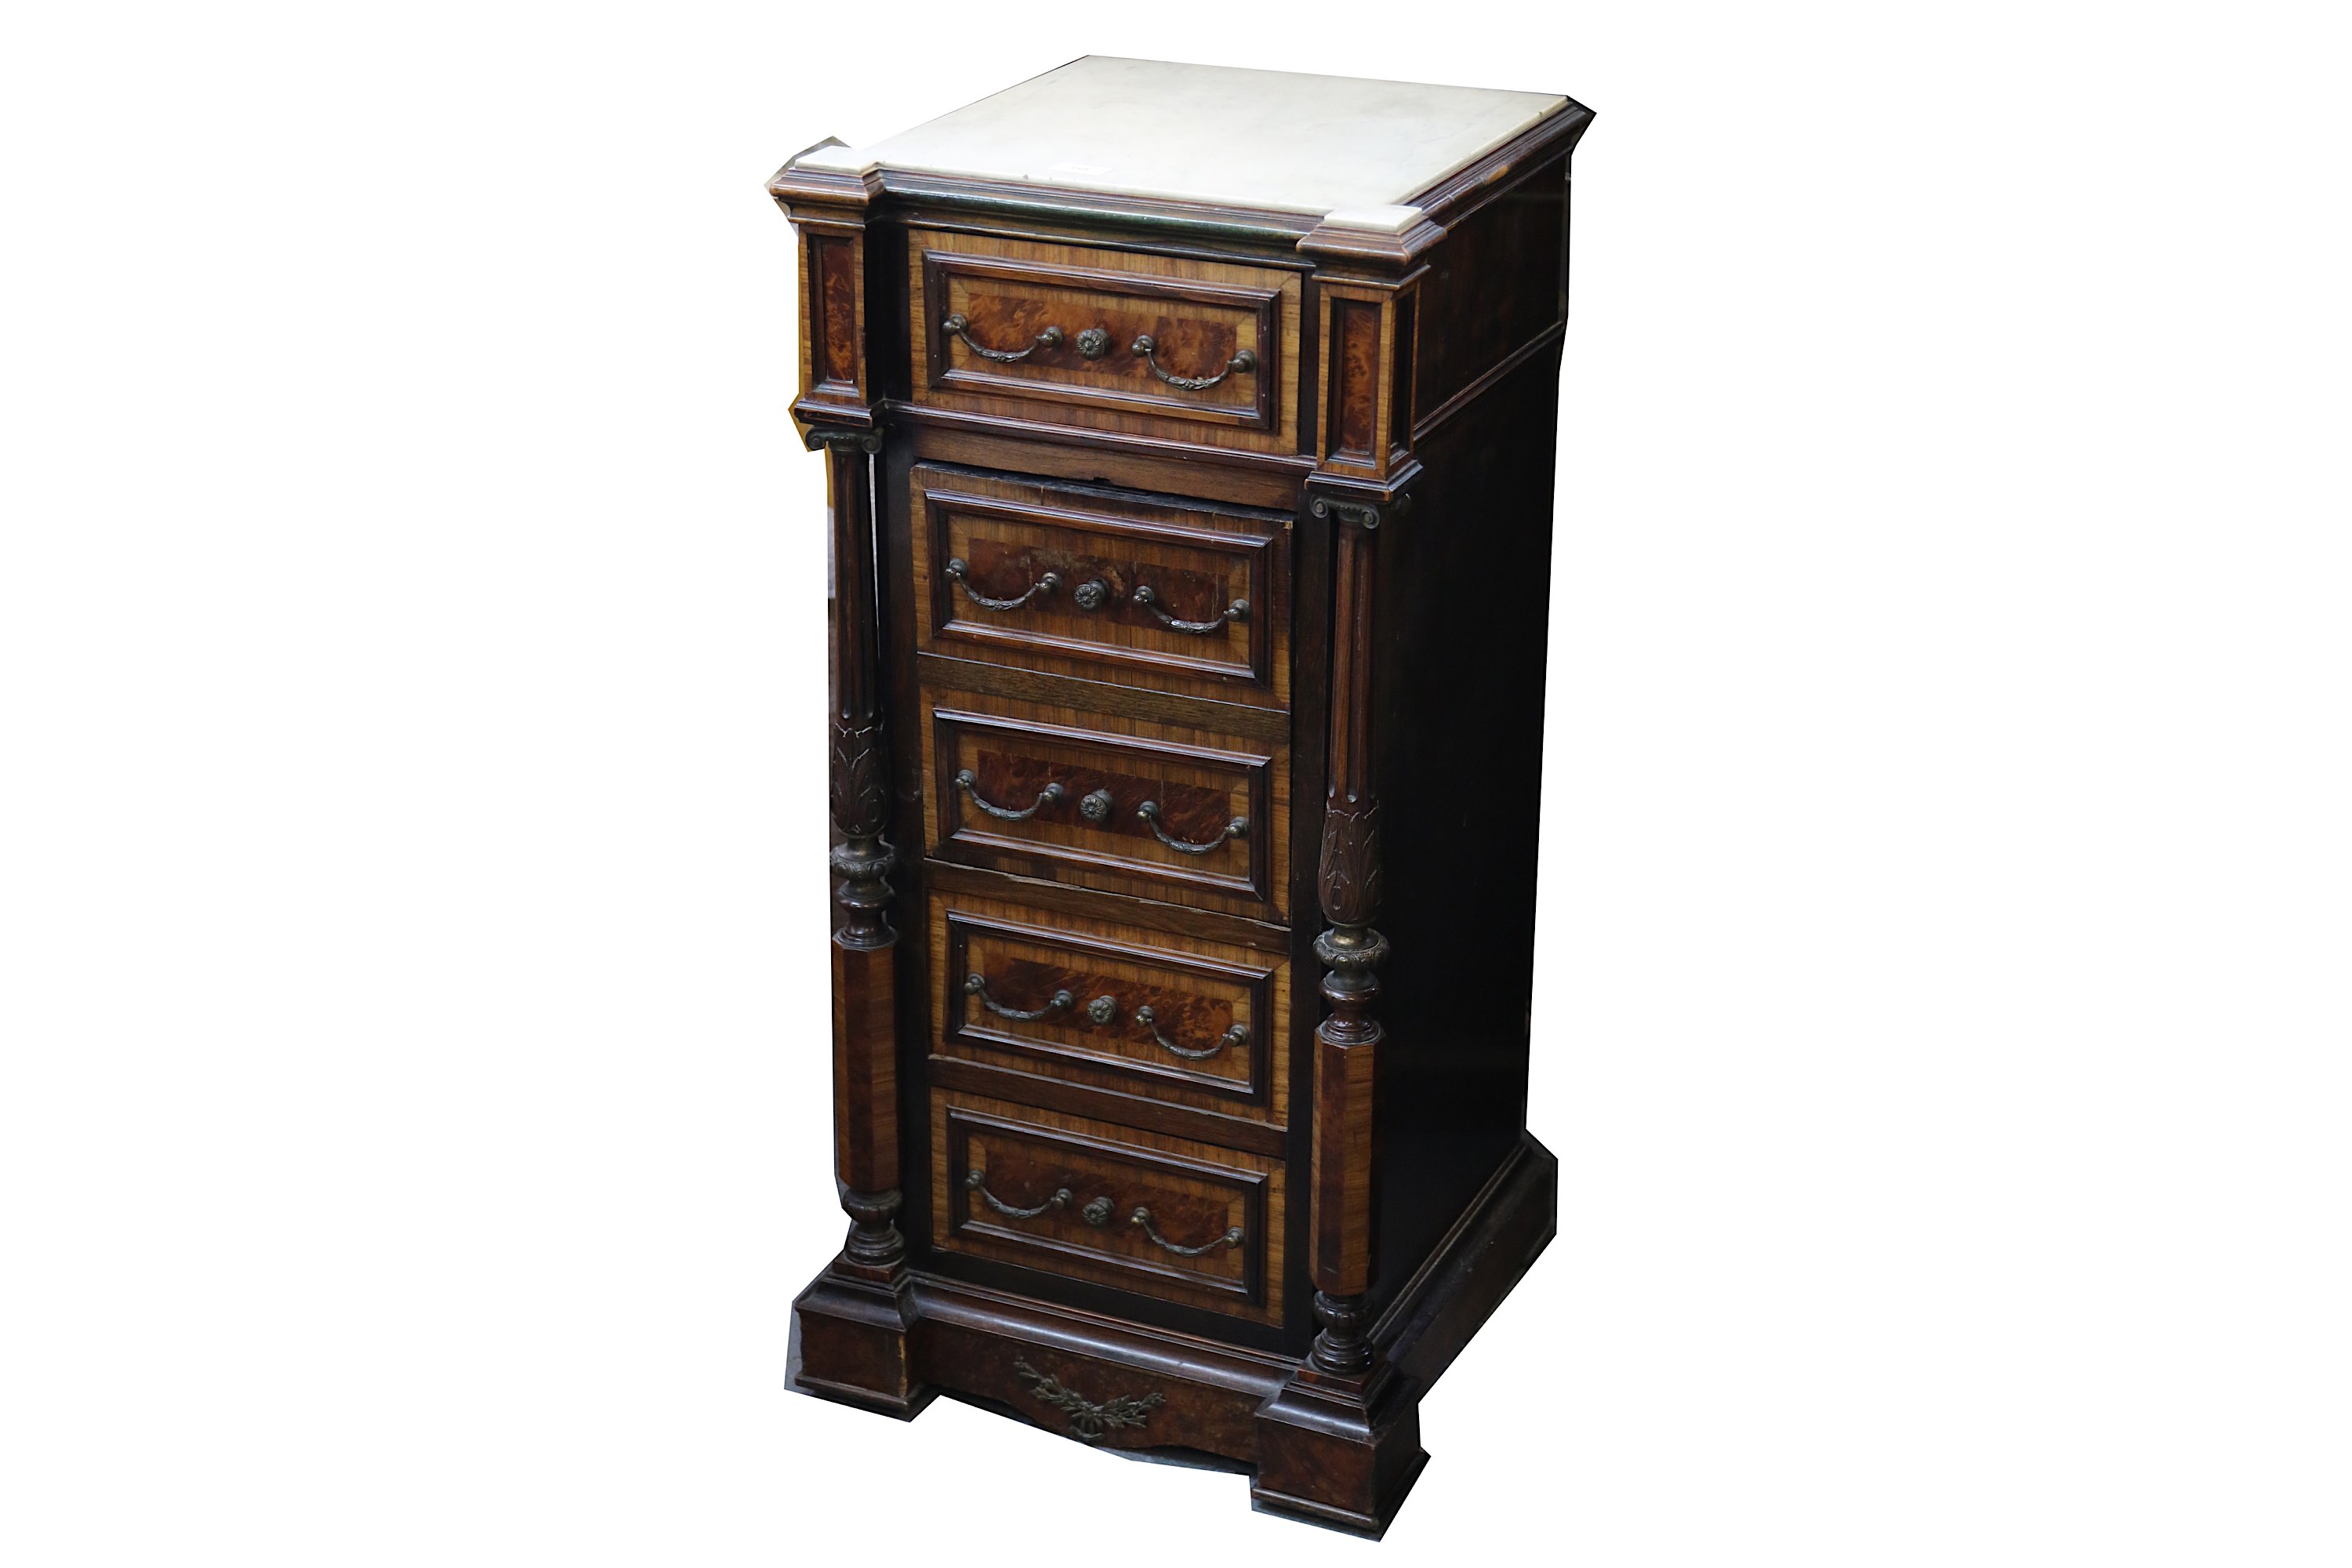 A 19th Century French inlaid kingwood pedestal cabinet, with a marble top over three graduated